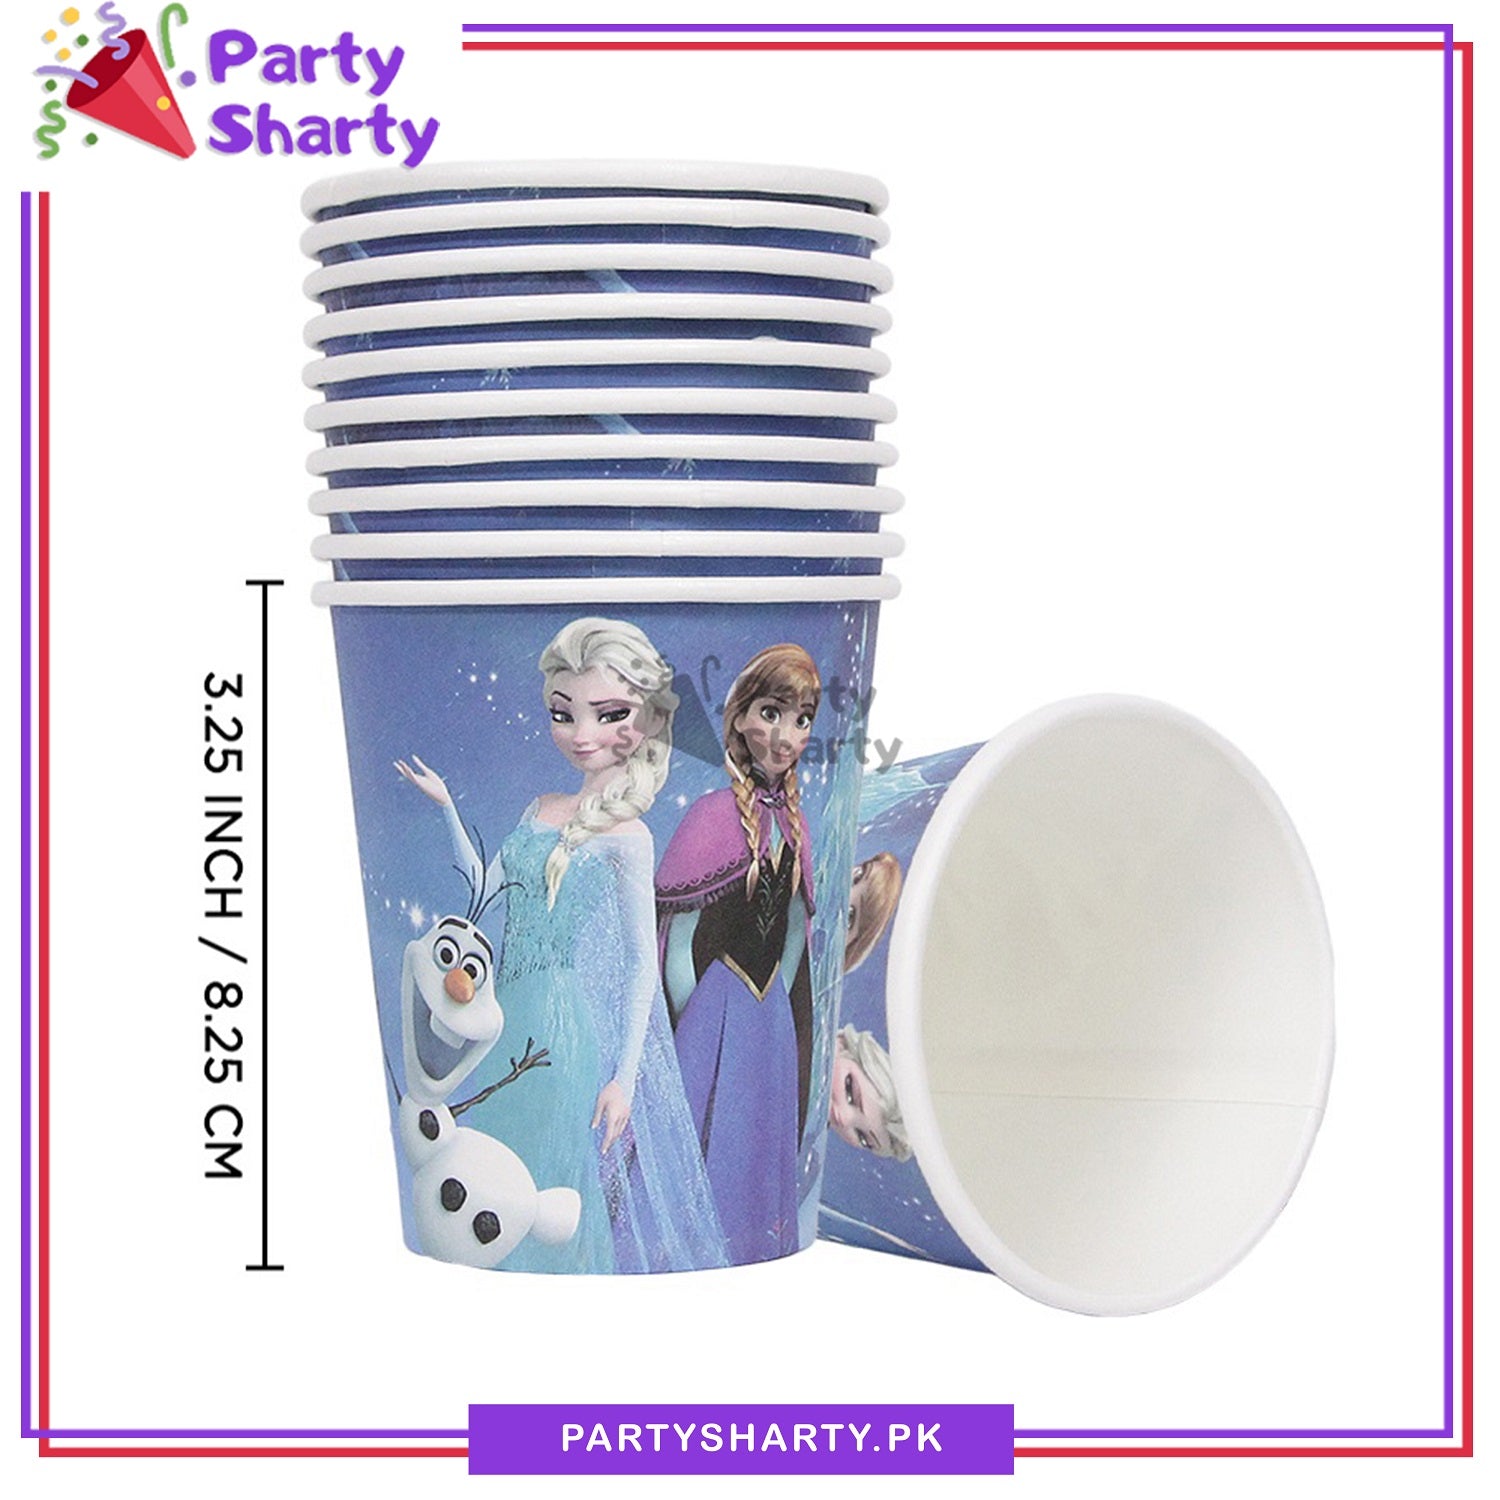 Frozen Theme Birthday Party Paper Cups / Glass For Themed Based Party Supplies and Decorations